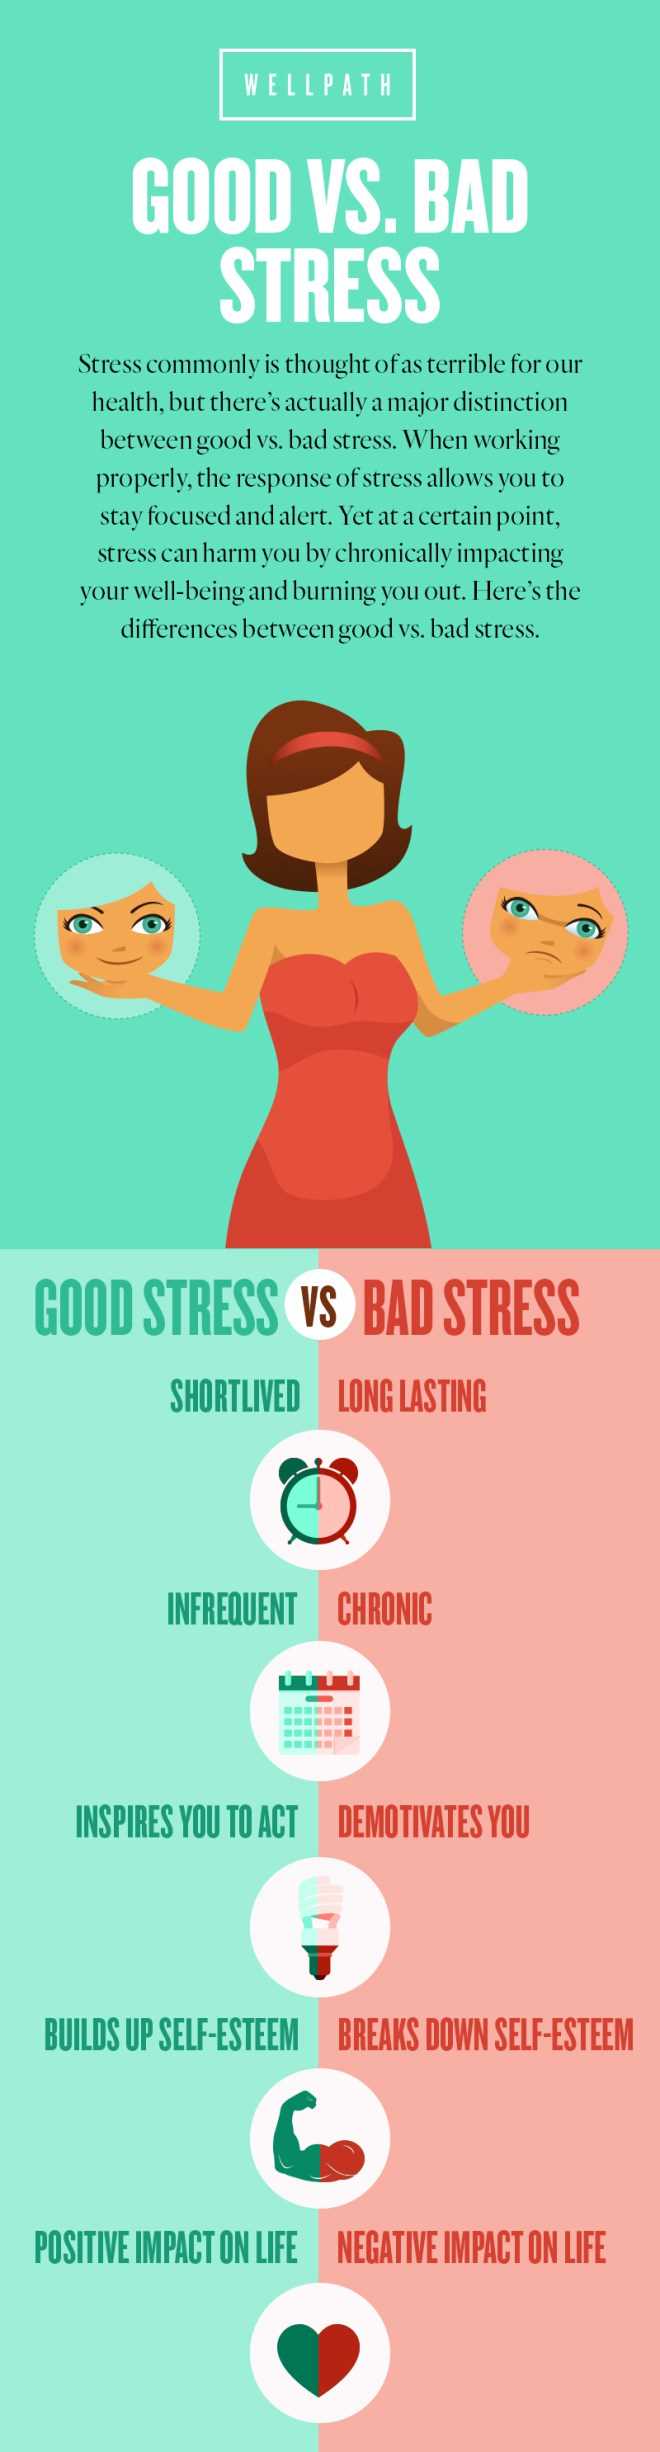 Good stress bad stress whats the difference